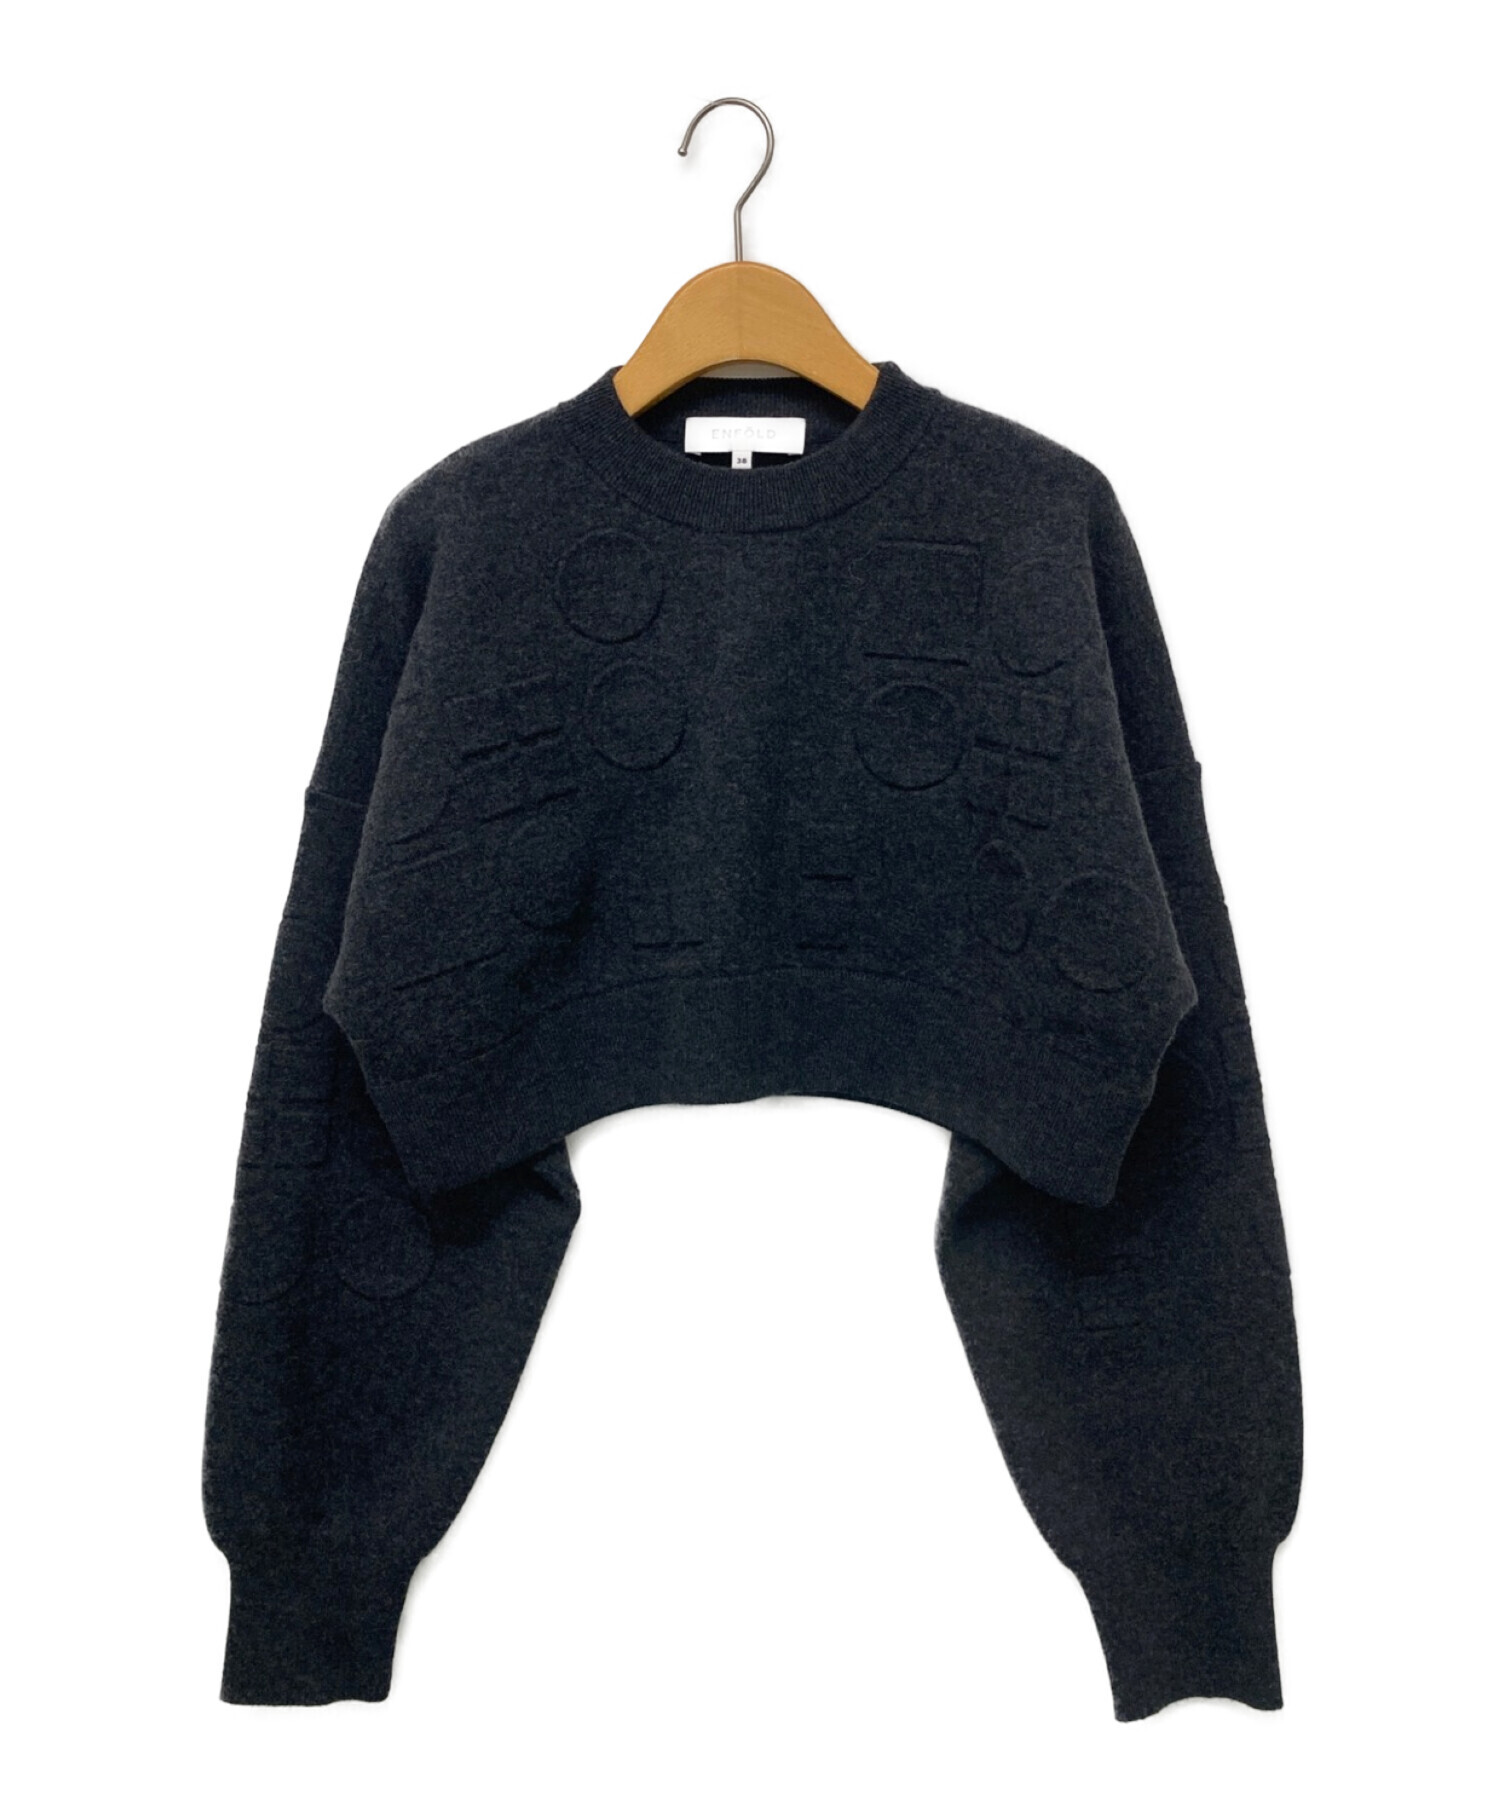 ENFOLD O EMBOSS CROPPED PULLOVER　ショートニット着丈ショート